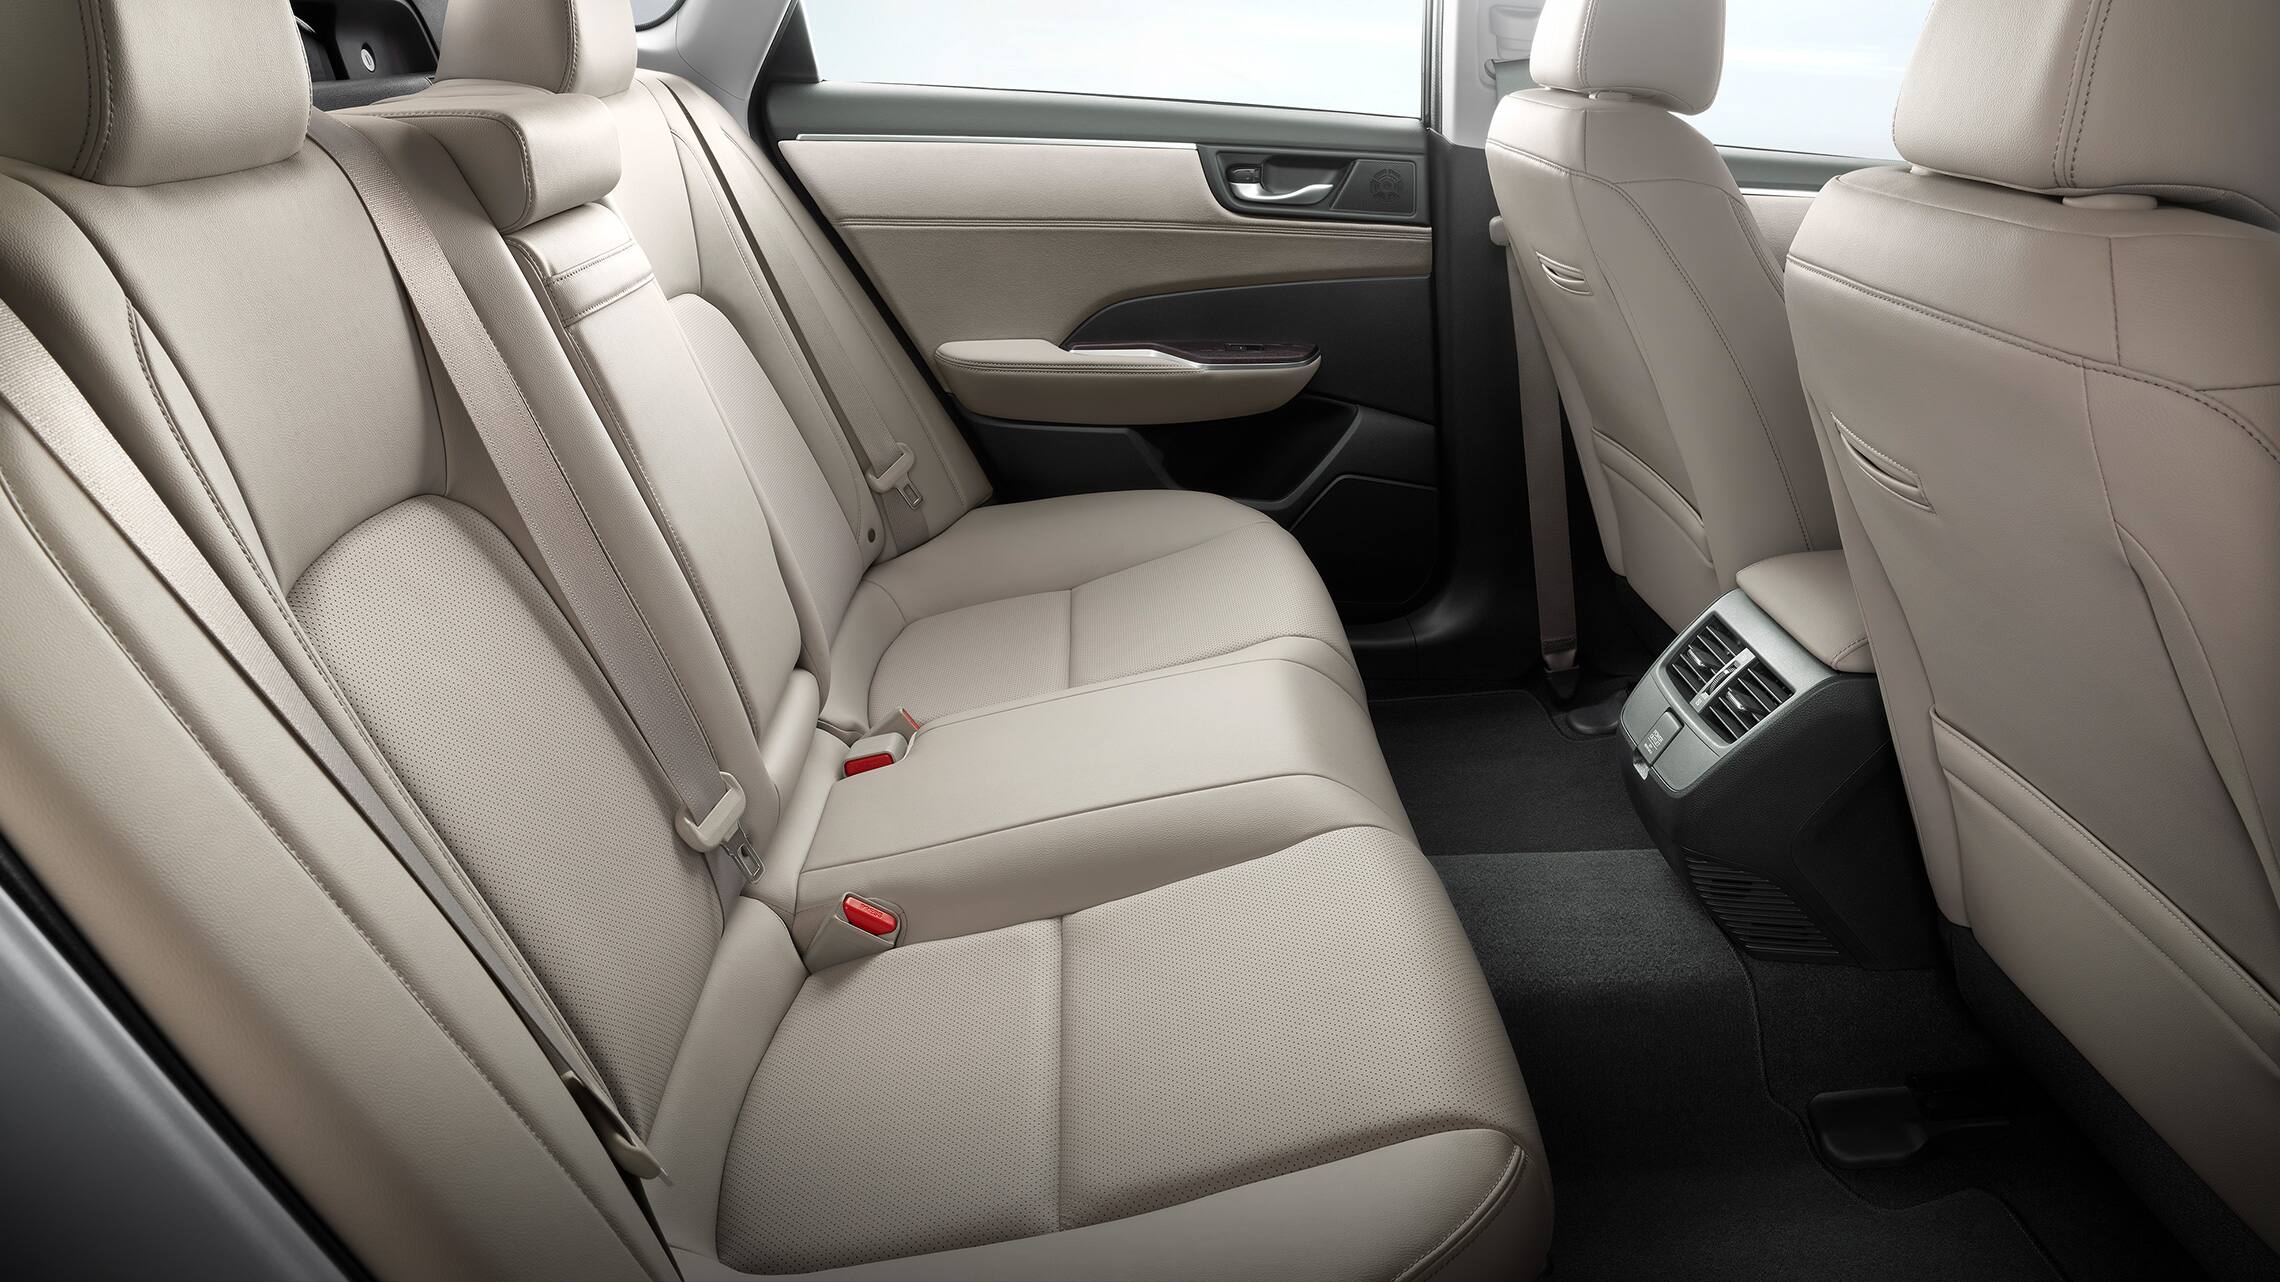 Rear seats of 2021 Clarity Plug-In Hybrid with Beige Leather-trimmed interior.